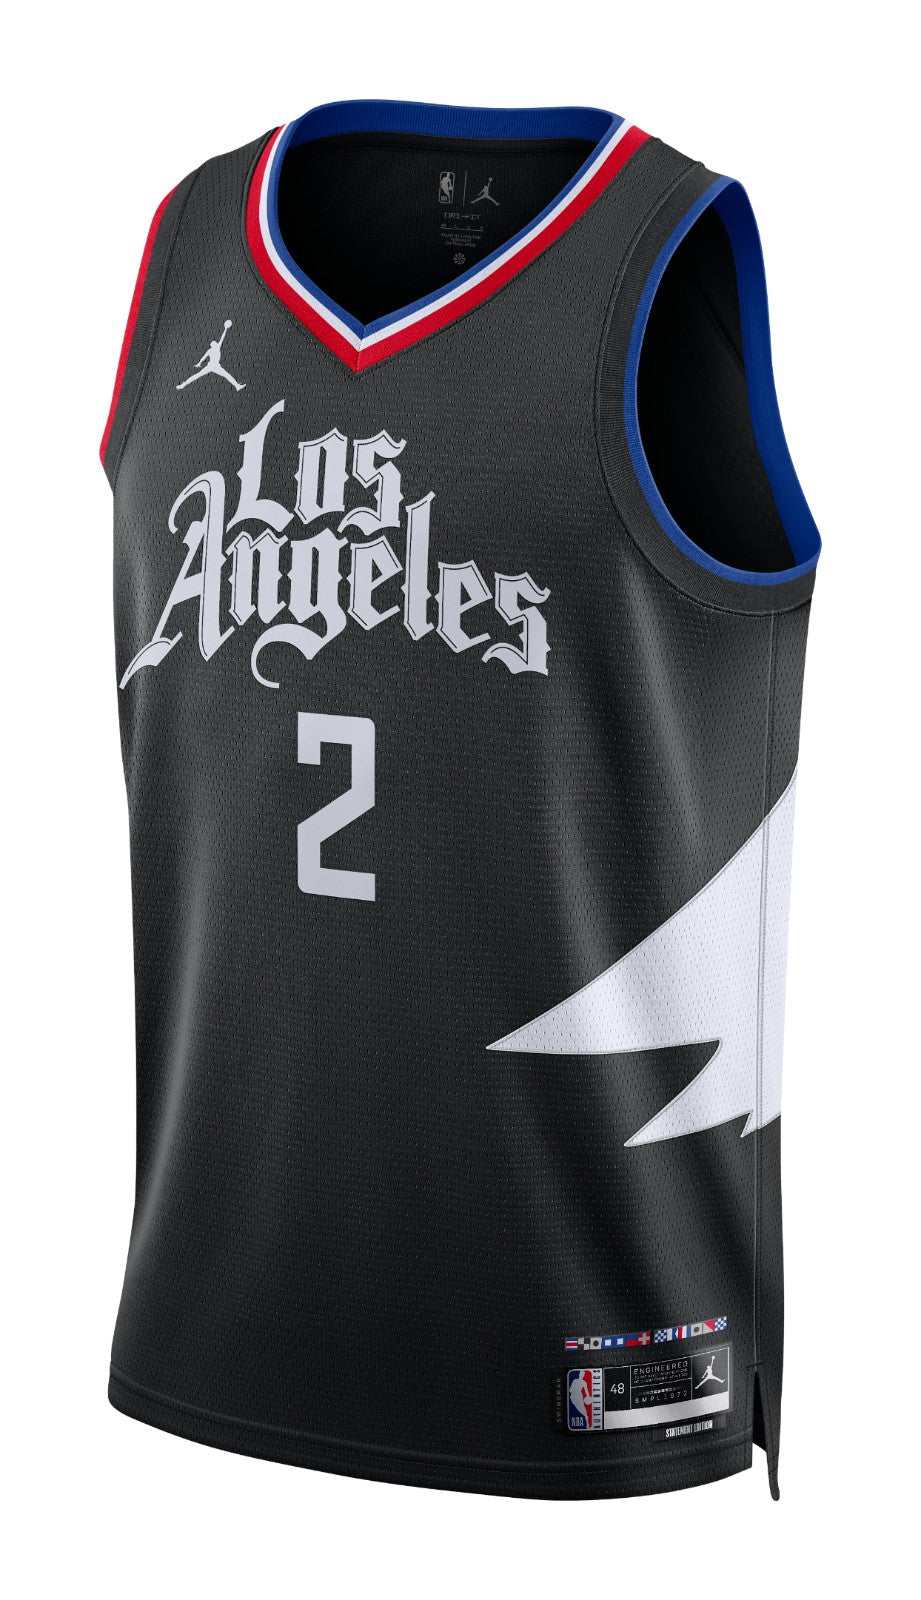 LOS ANGELES CLIPPERS STATEMENT JERSEY 23/24